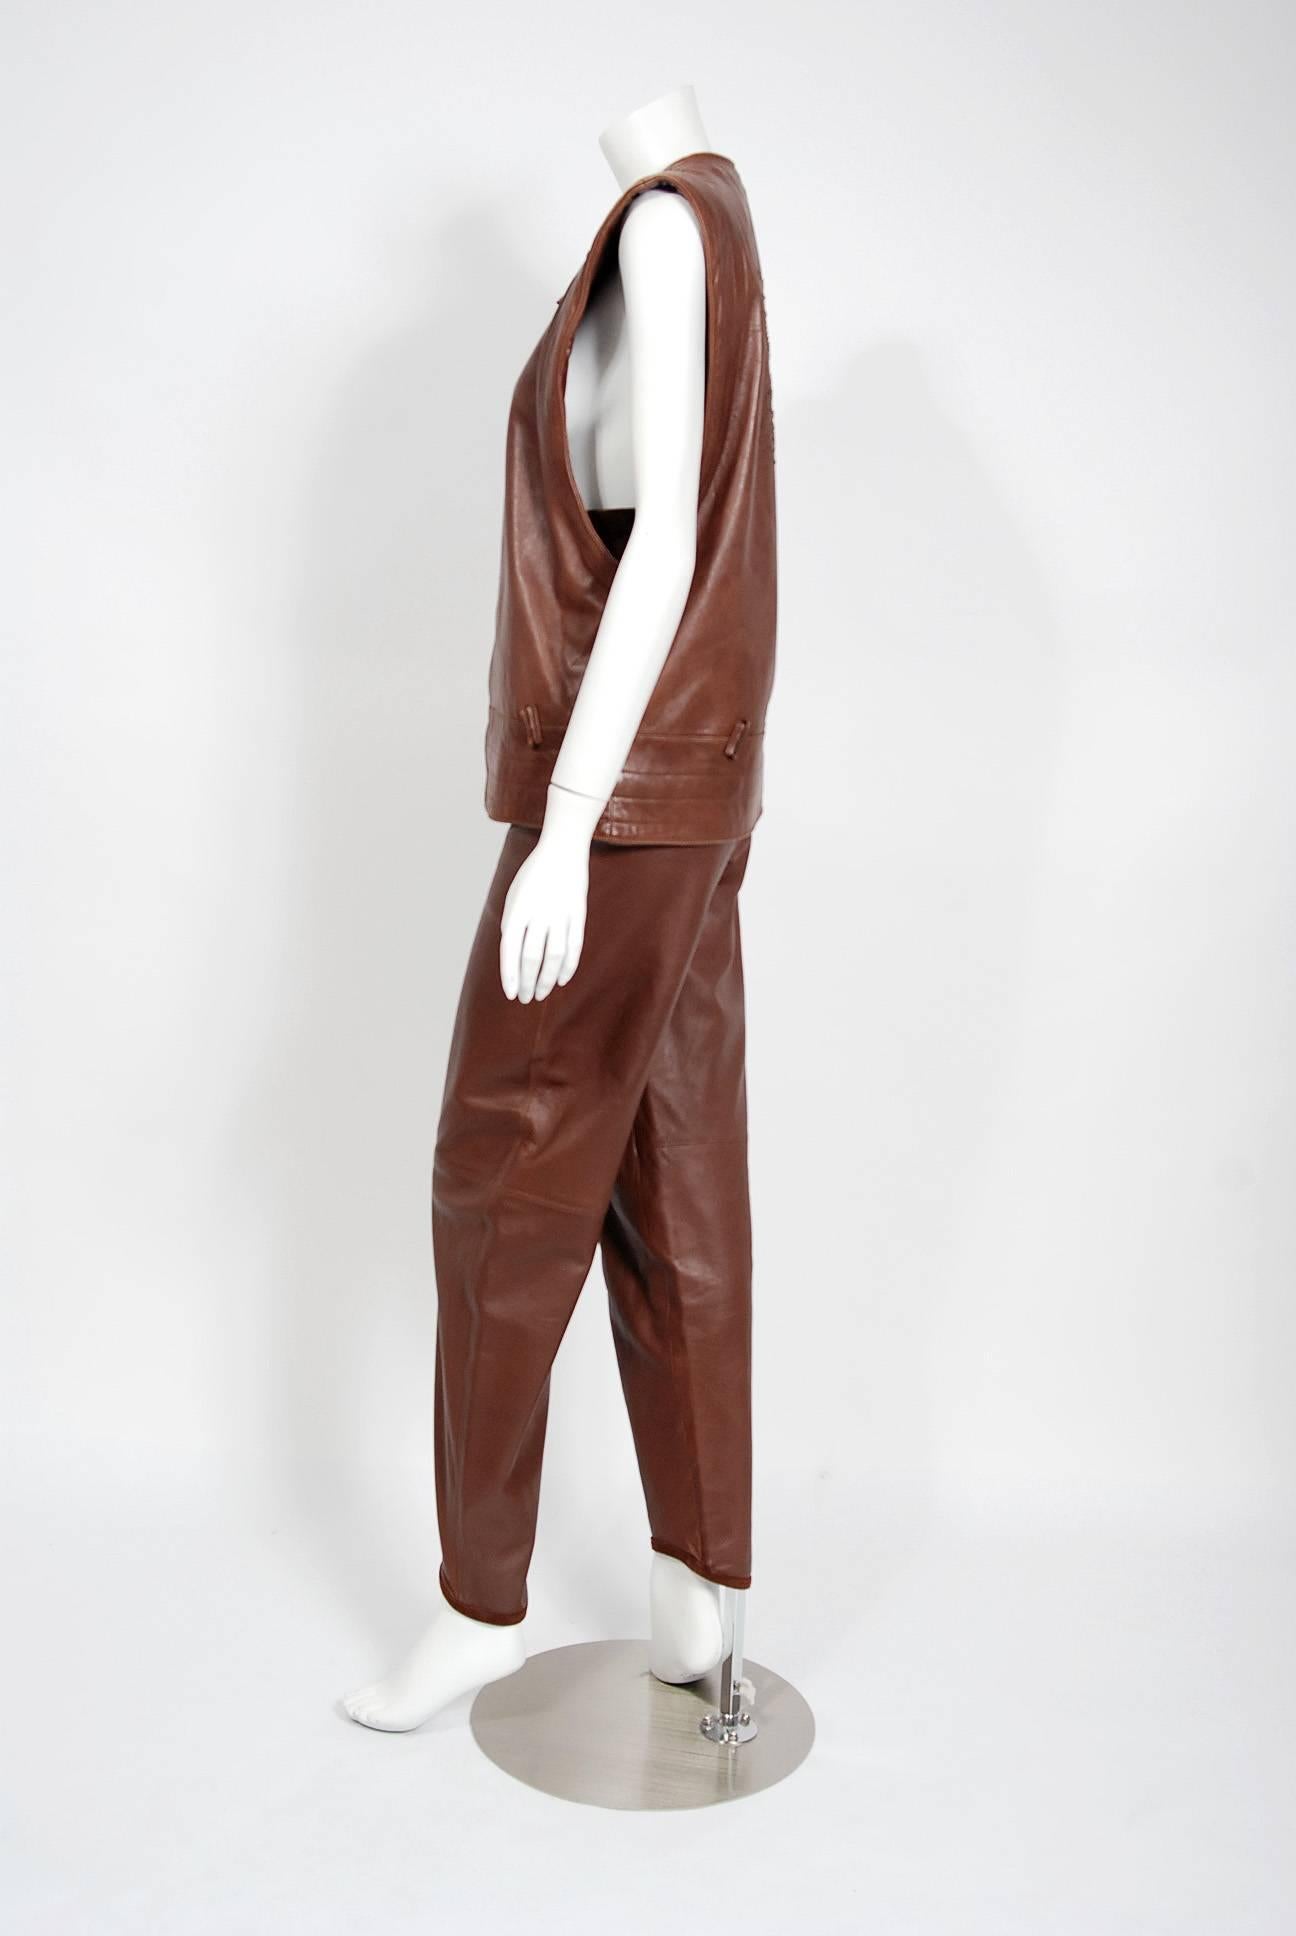 1984 Gianni Versace Couture Studded Brown Leather Vest and High Waist Pants 1